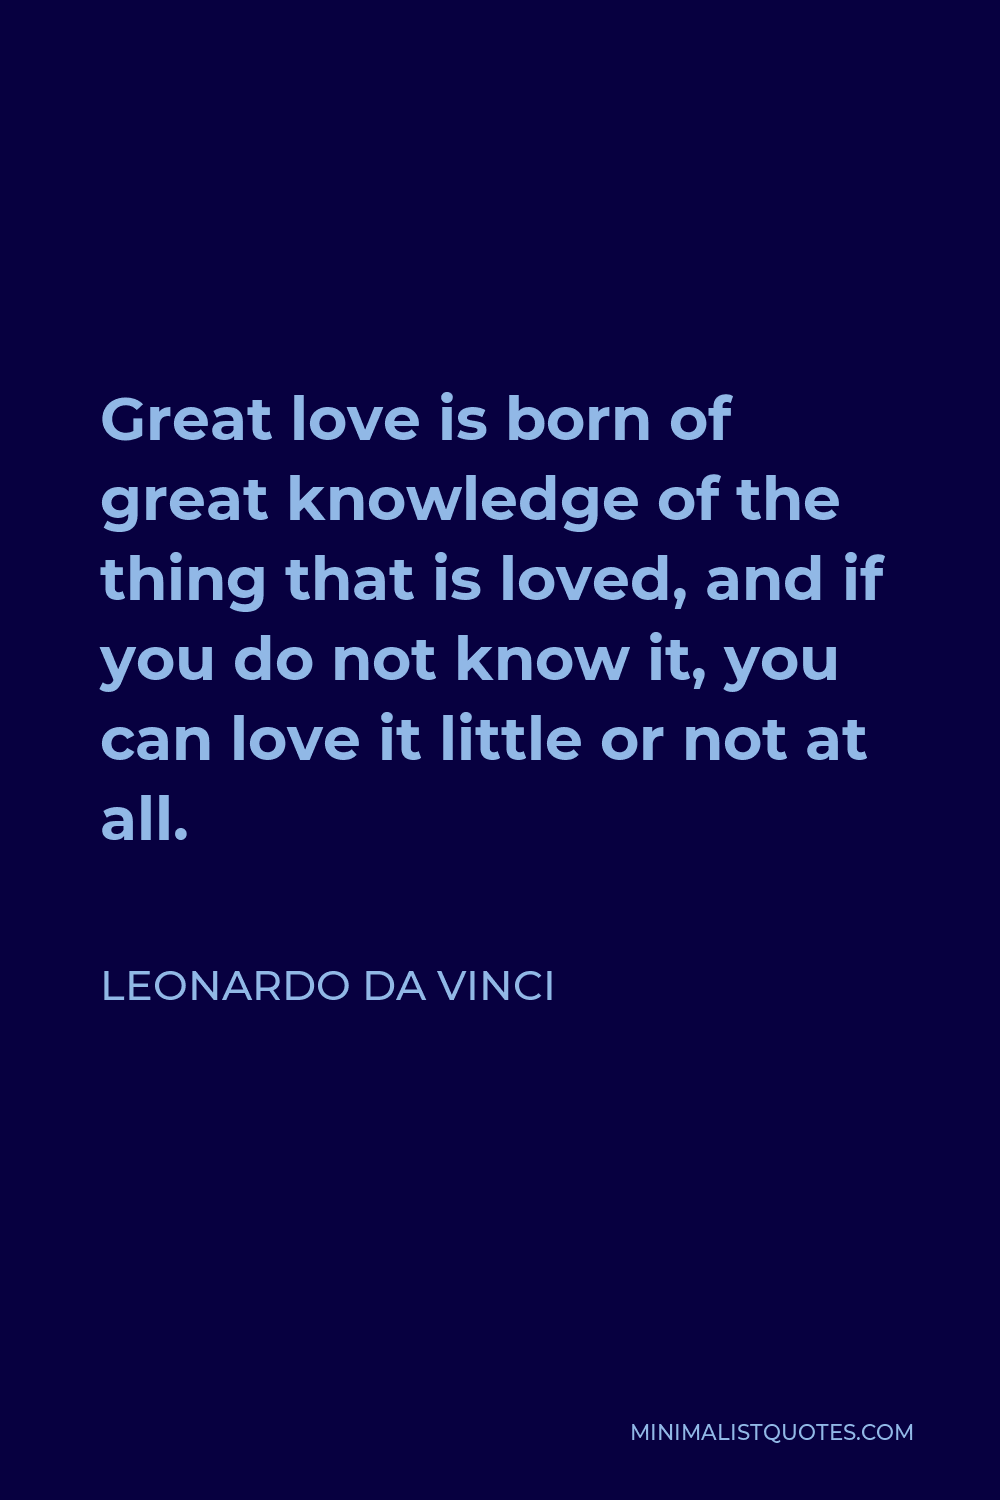 Leonardo da Vinci Quote - Great love is born of great knowledge of the thing that is loved, and if you do not know it, you can love it little or not at all.